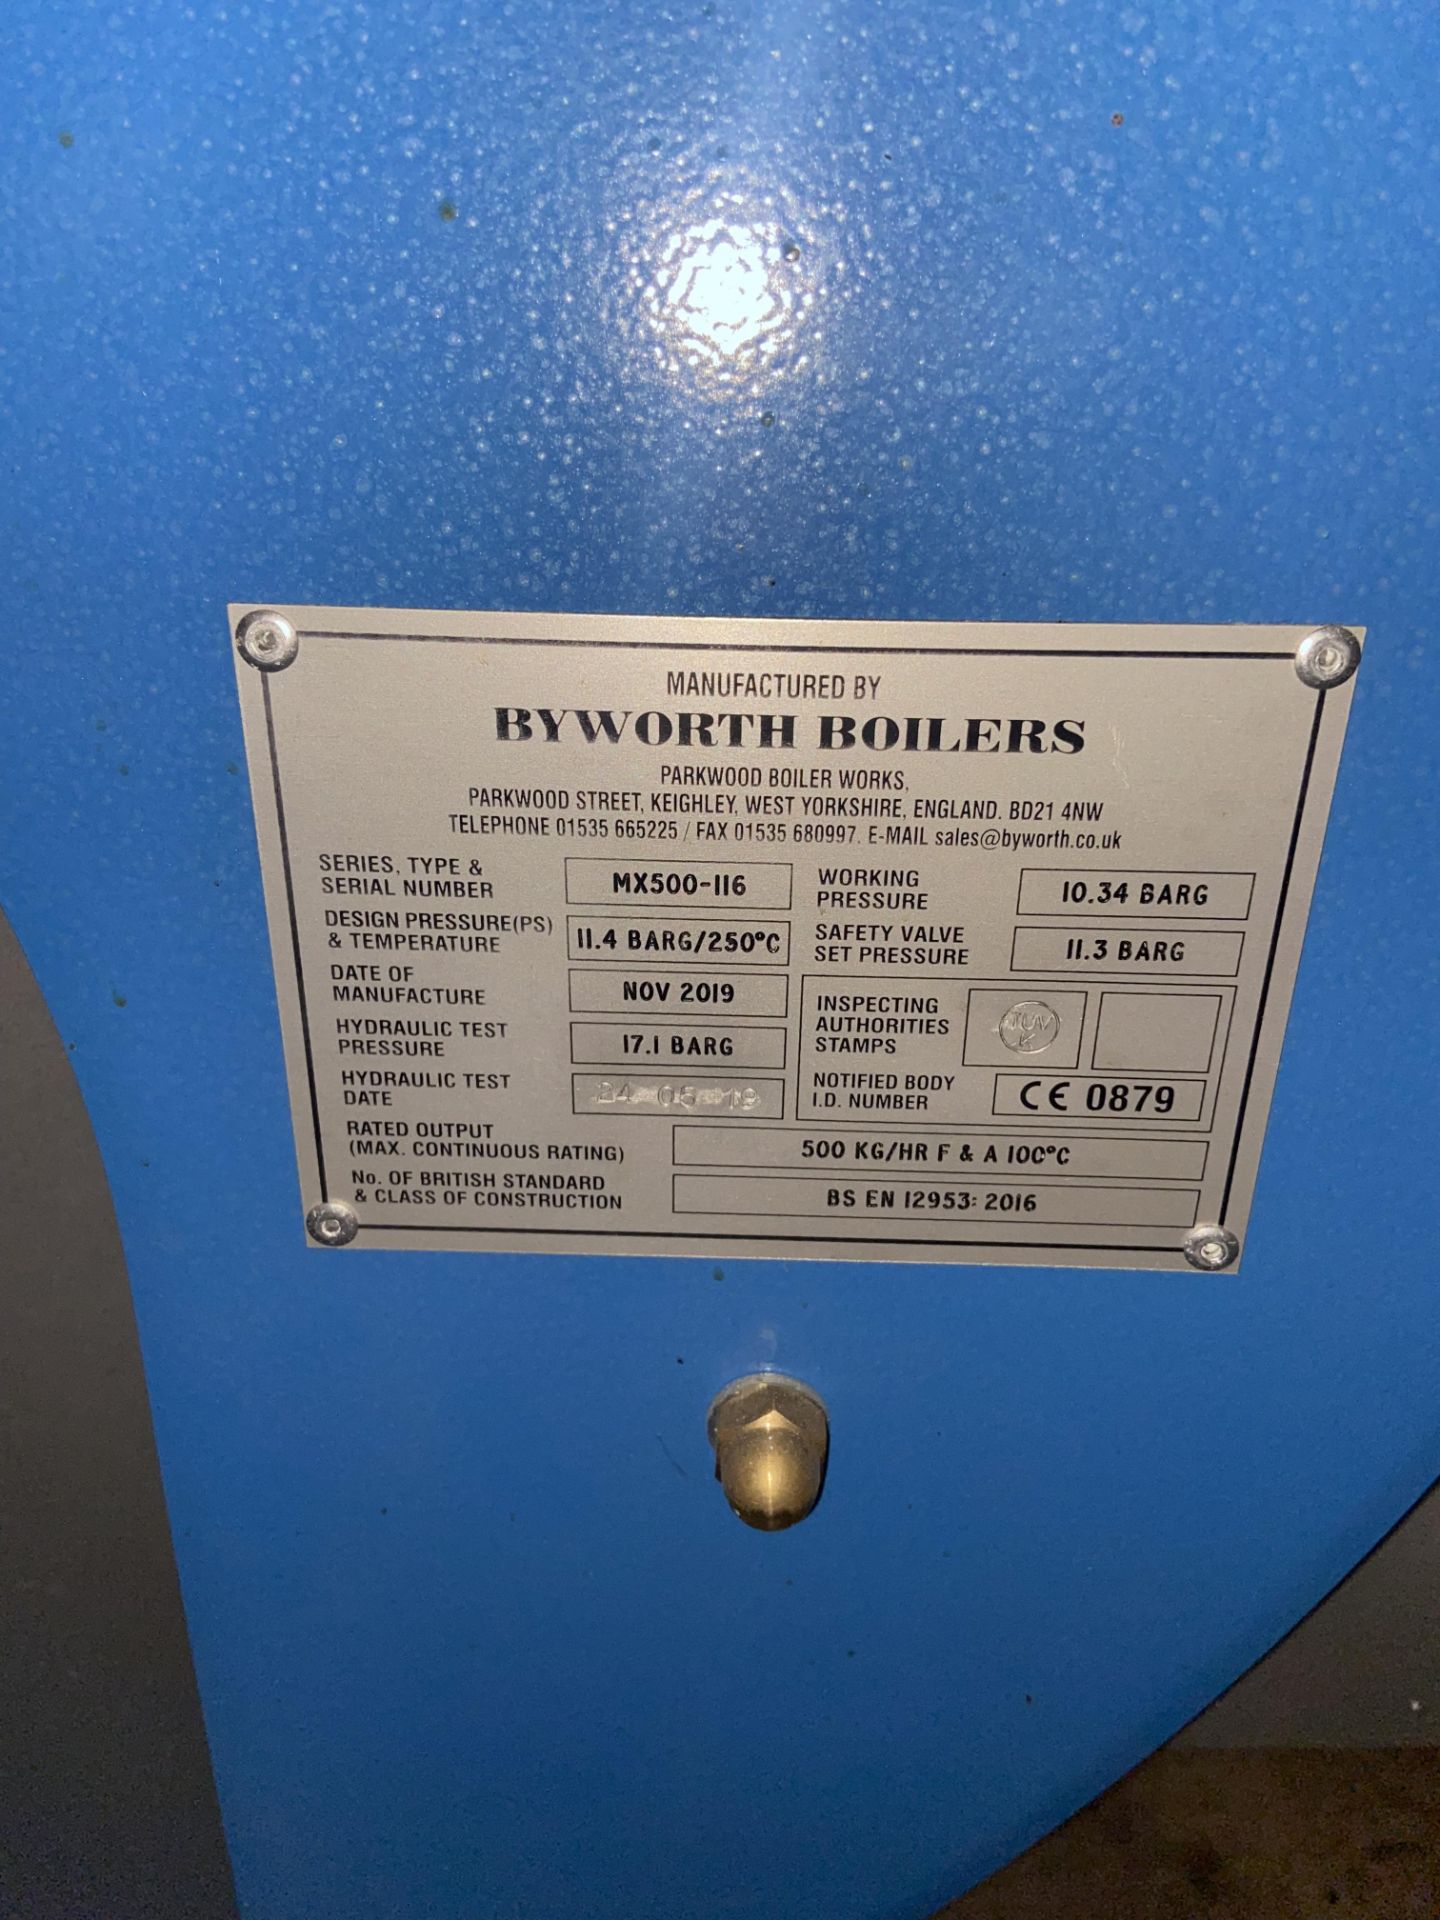 Byworth MX500-116 500kg/hr (F&A 100°C) GAS FIRED STEAM BOILER, serial no. MX500-116, date of - Image 10 of 17